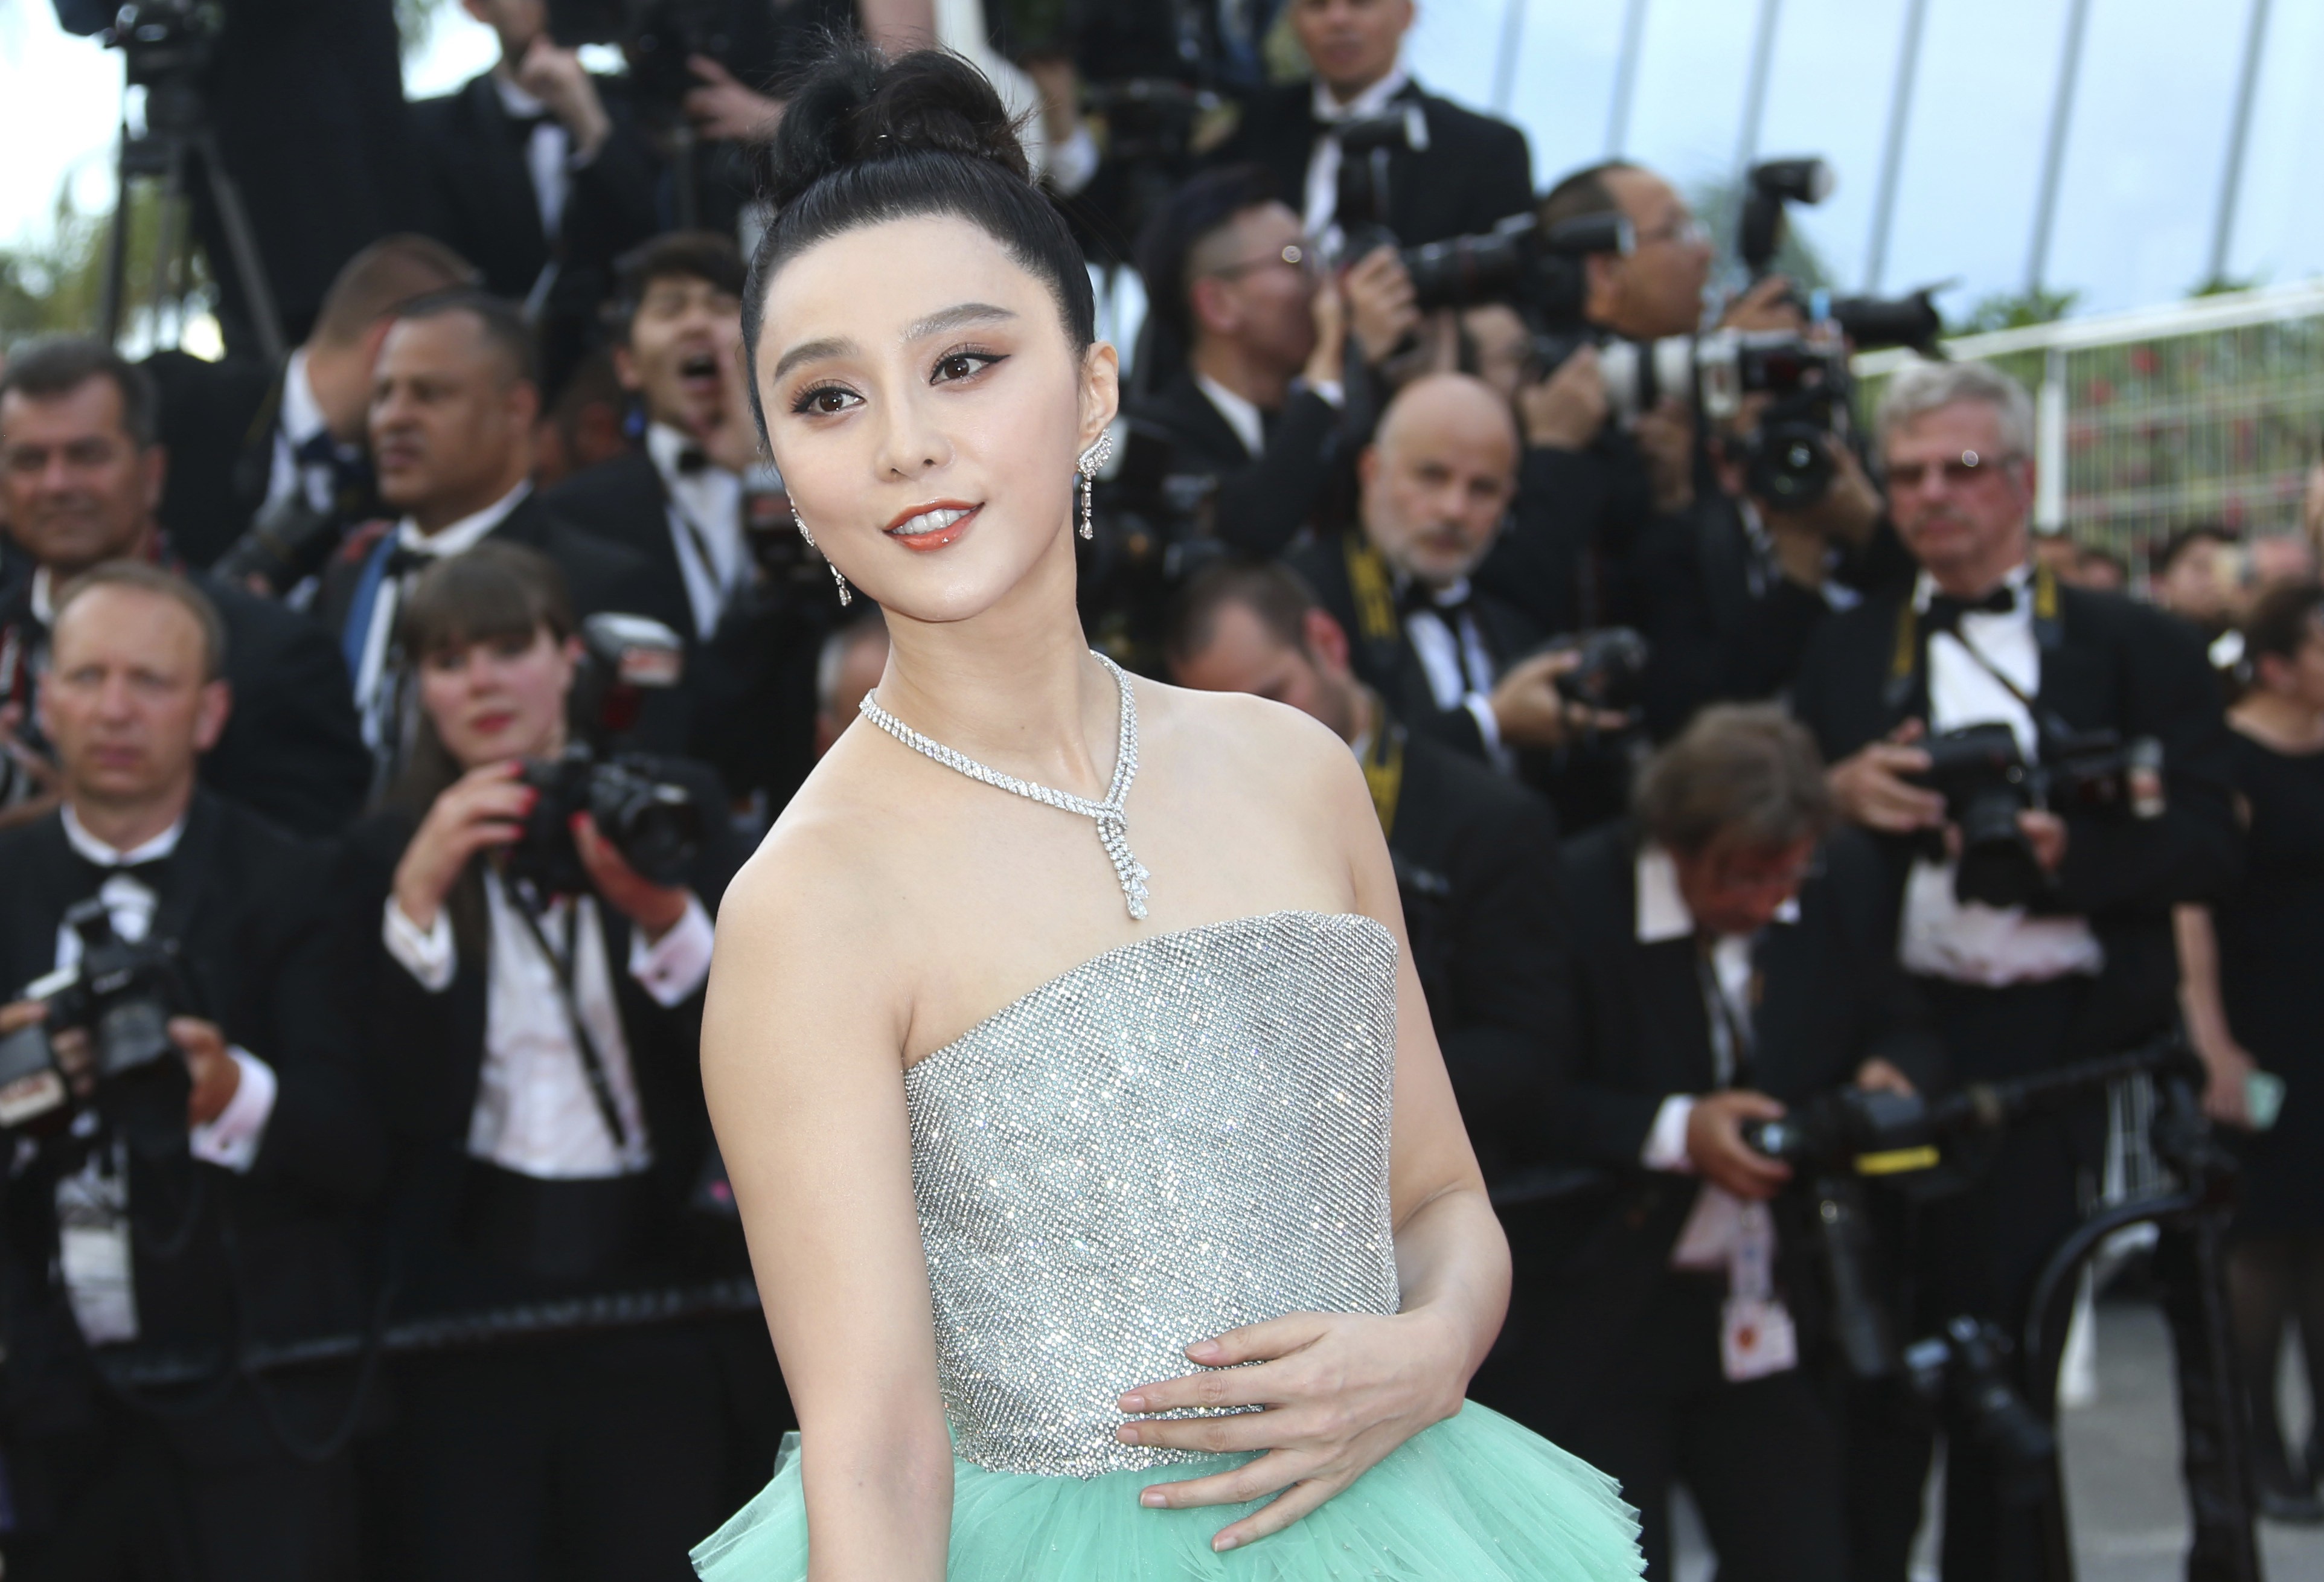 Chinese actress Fan Bingbing arrives for the opening ceremony of the 2018 Cannes Film Festival in southern France. One of China’s highest paid celebrities, Fan’s involvement in a massive tax-evasion scandal subsequently tainted her image. Photo: AP